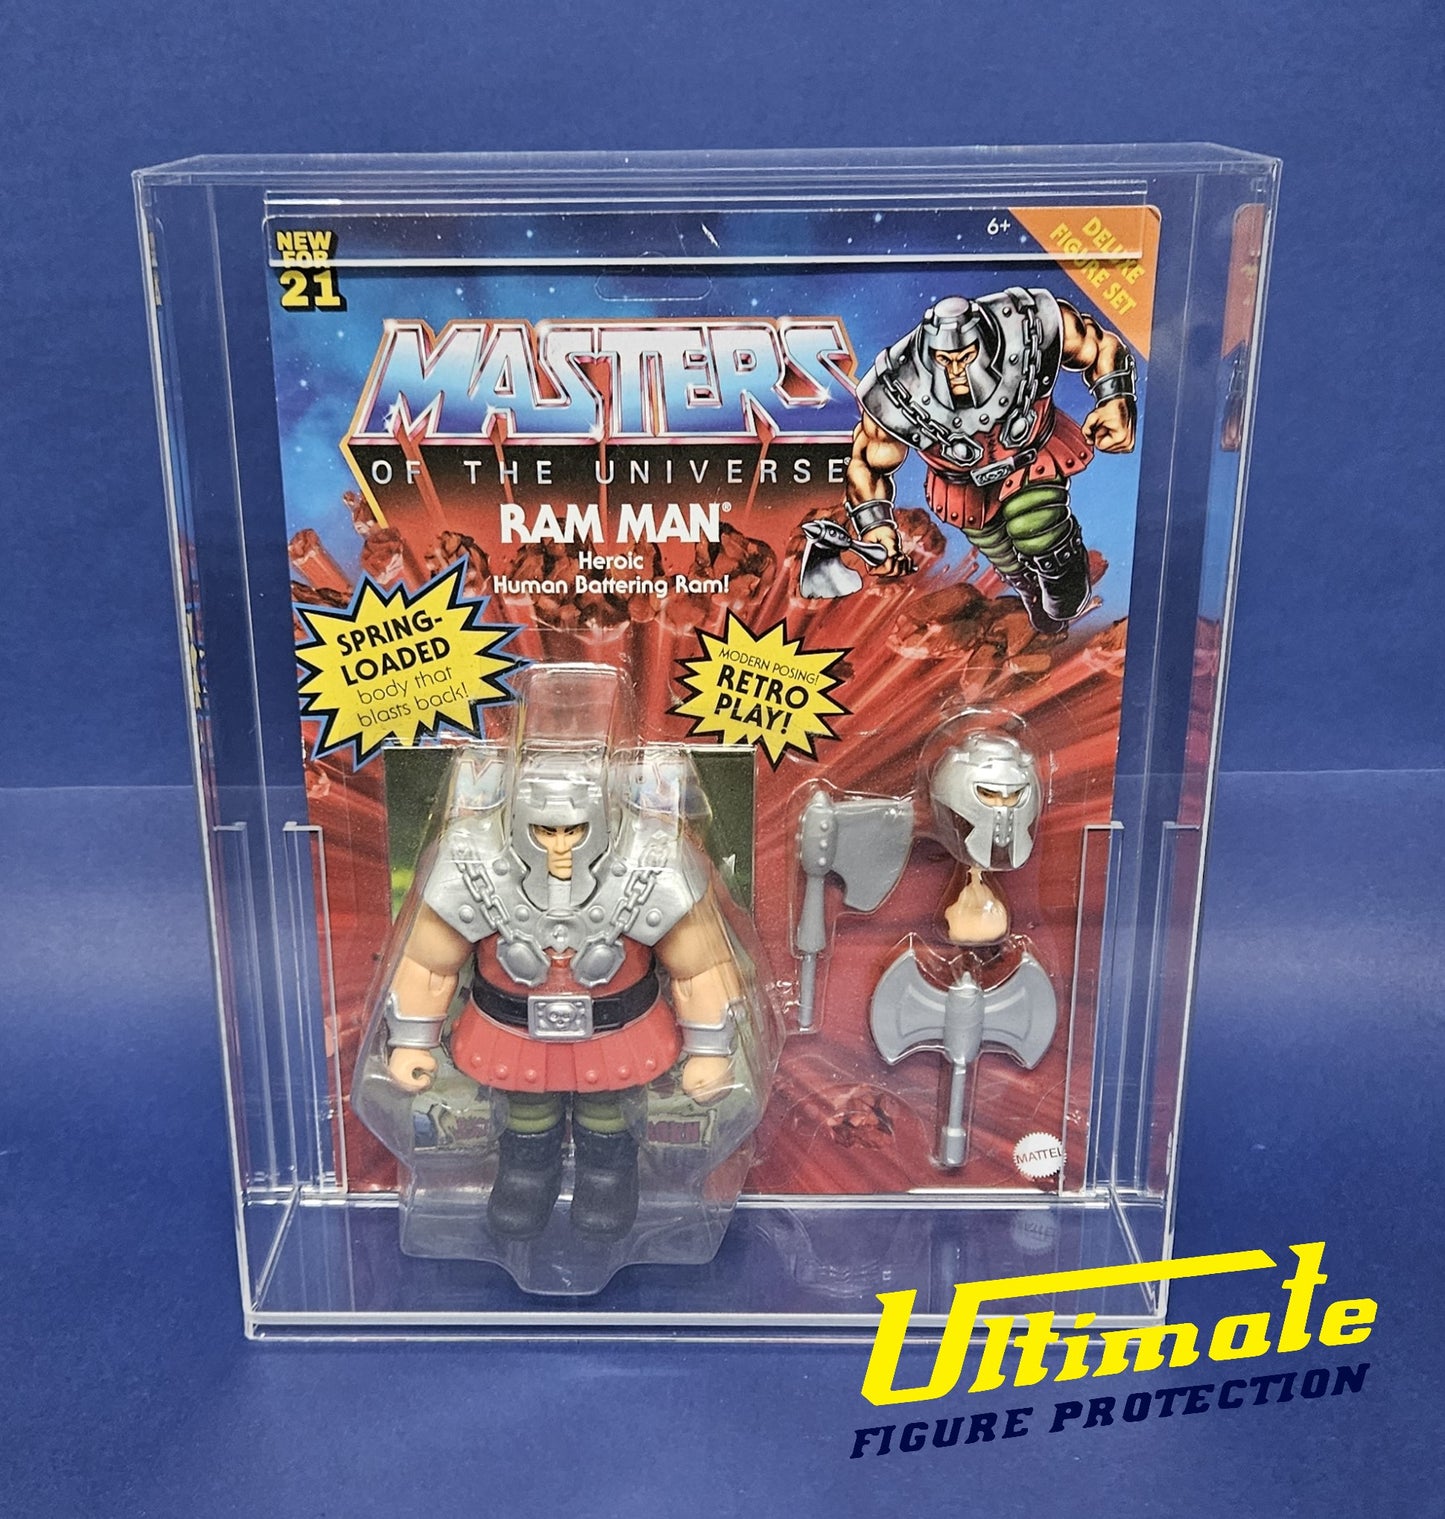 MASTERS OF THE UNIVERSE DELUXE